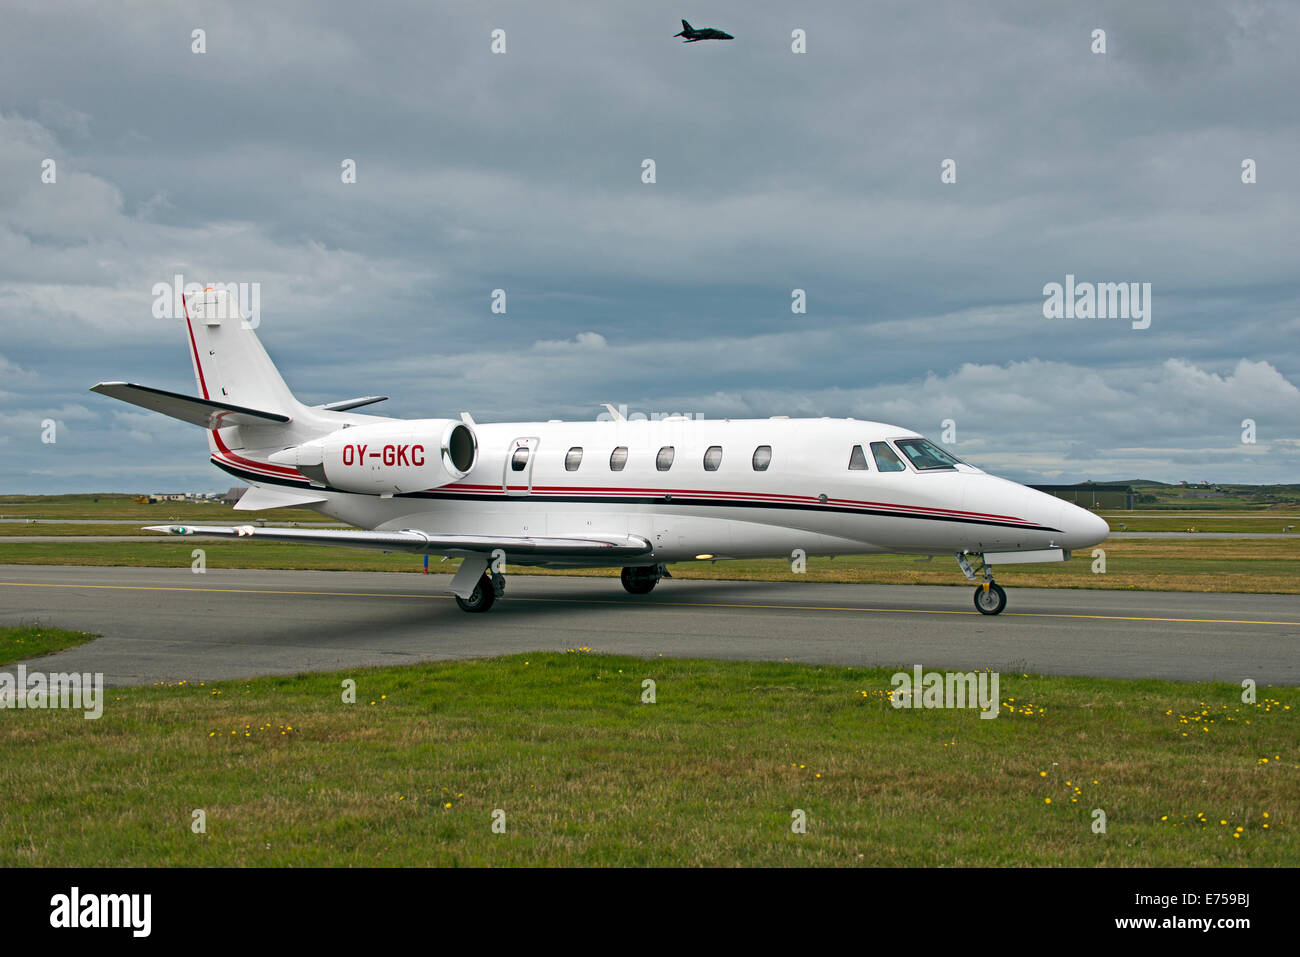 Lego Cessna 550 Citazione II OY-GKC Raf Valley Anglesey N Wales UK battenti. Foto Stock